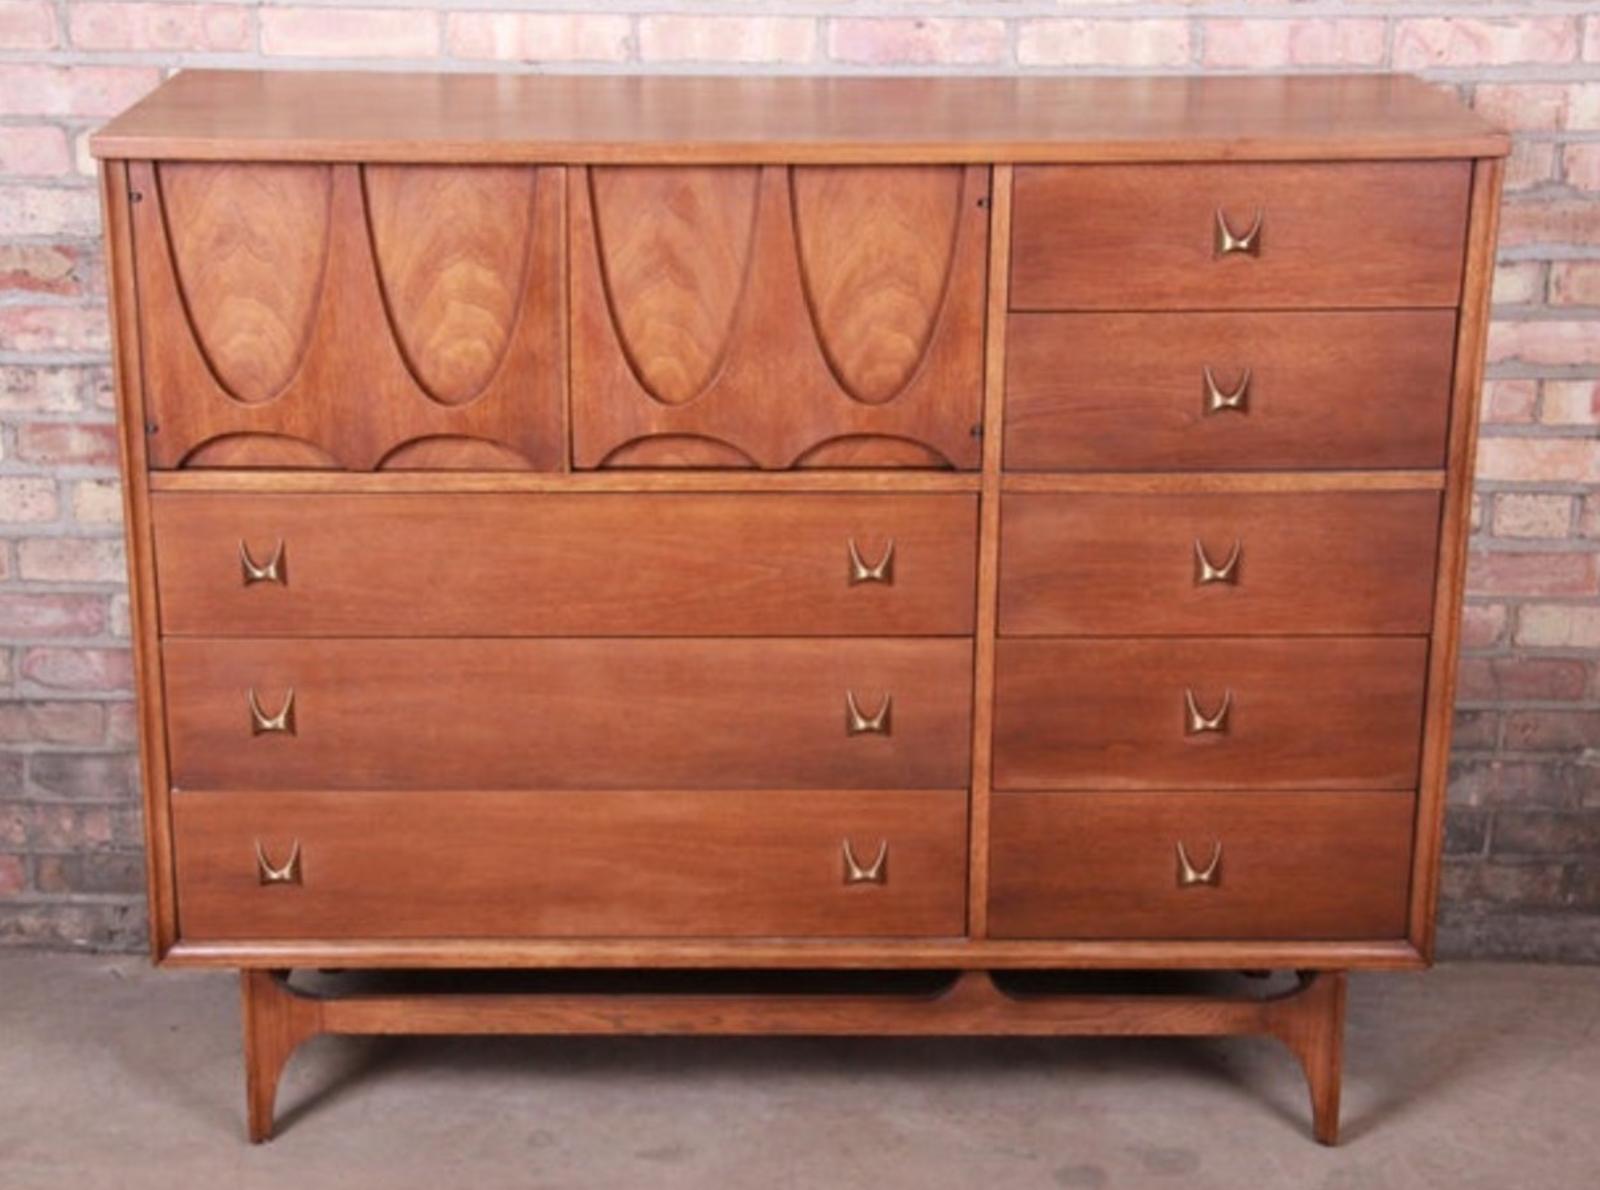 This fantastic tall chest was built in the 1970s by high-end manufacturer Broyhill for their Brasilia line of furntiure. Since then, the Brasilia line has become more desirable, and original sets are difficult to come by. Featuring walnut